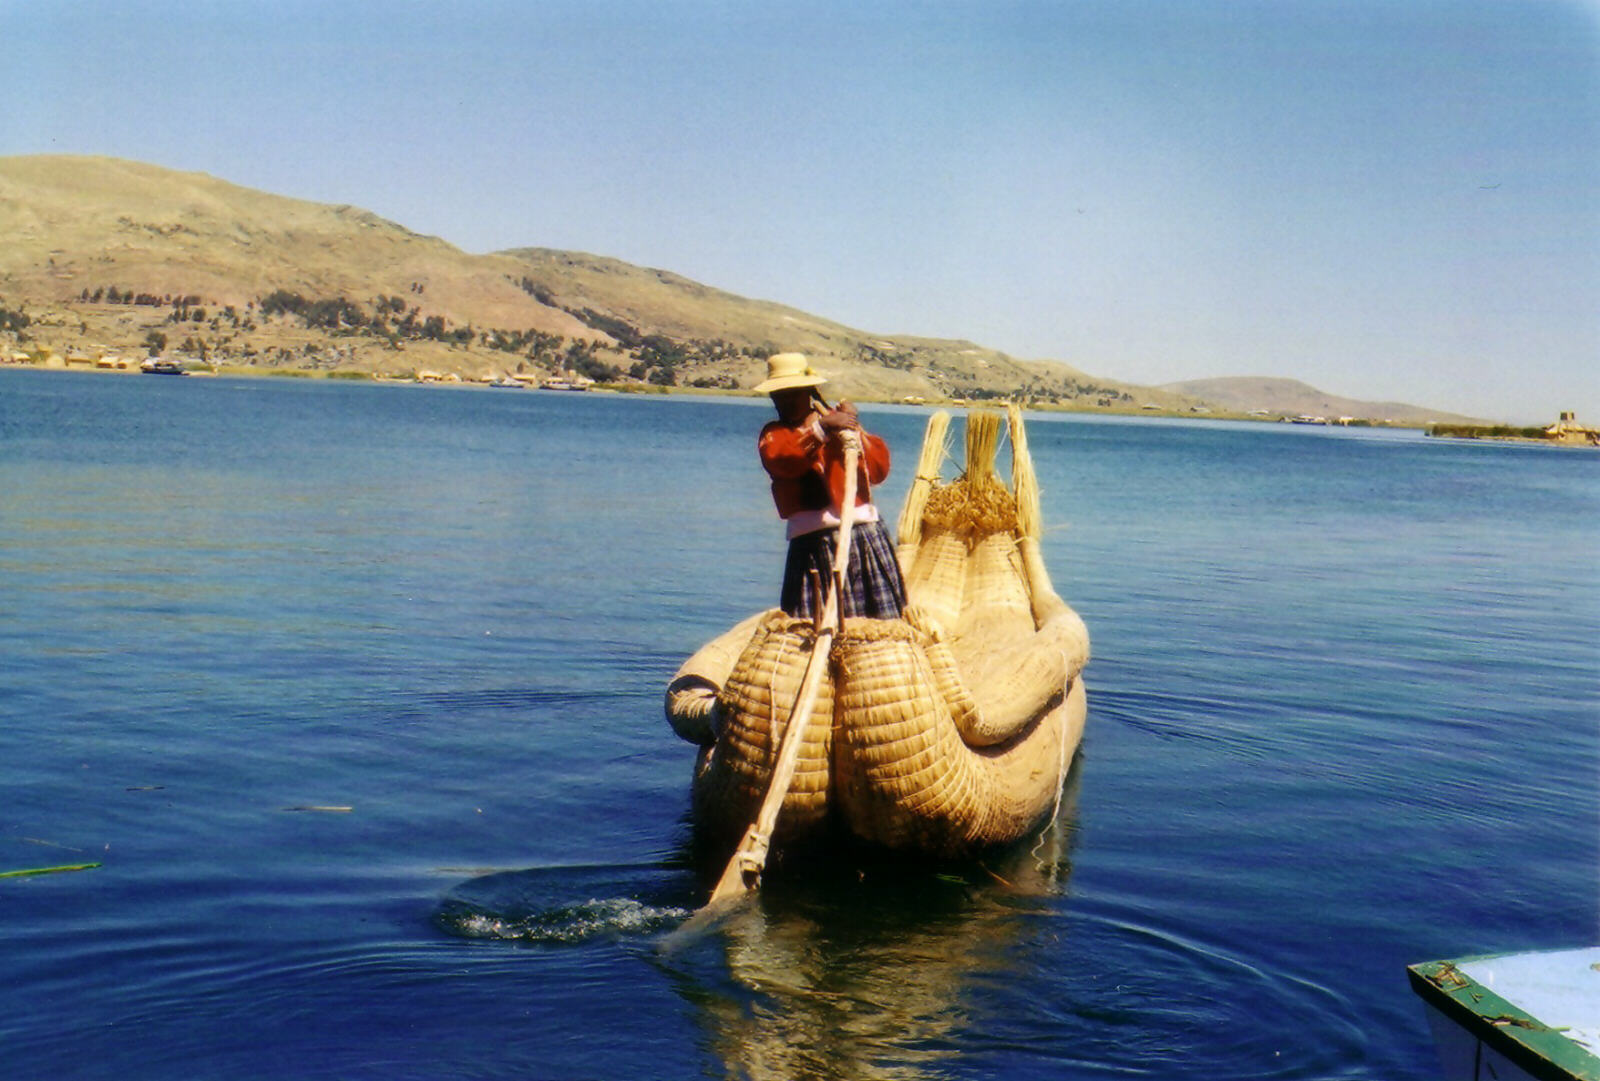 A Uros lady in a reed boat on Lake Titicaca, Peru